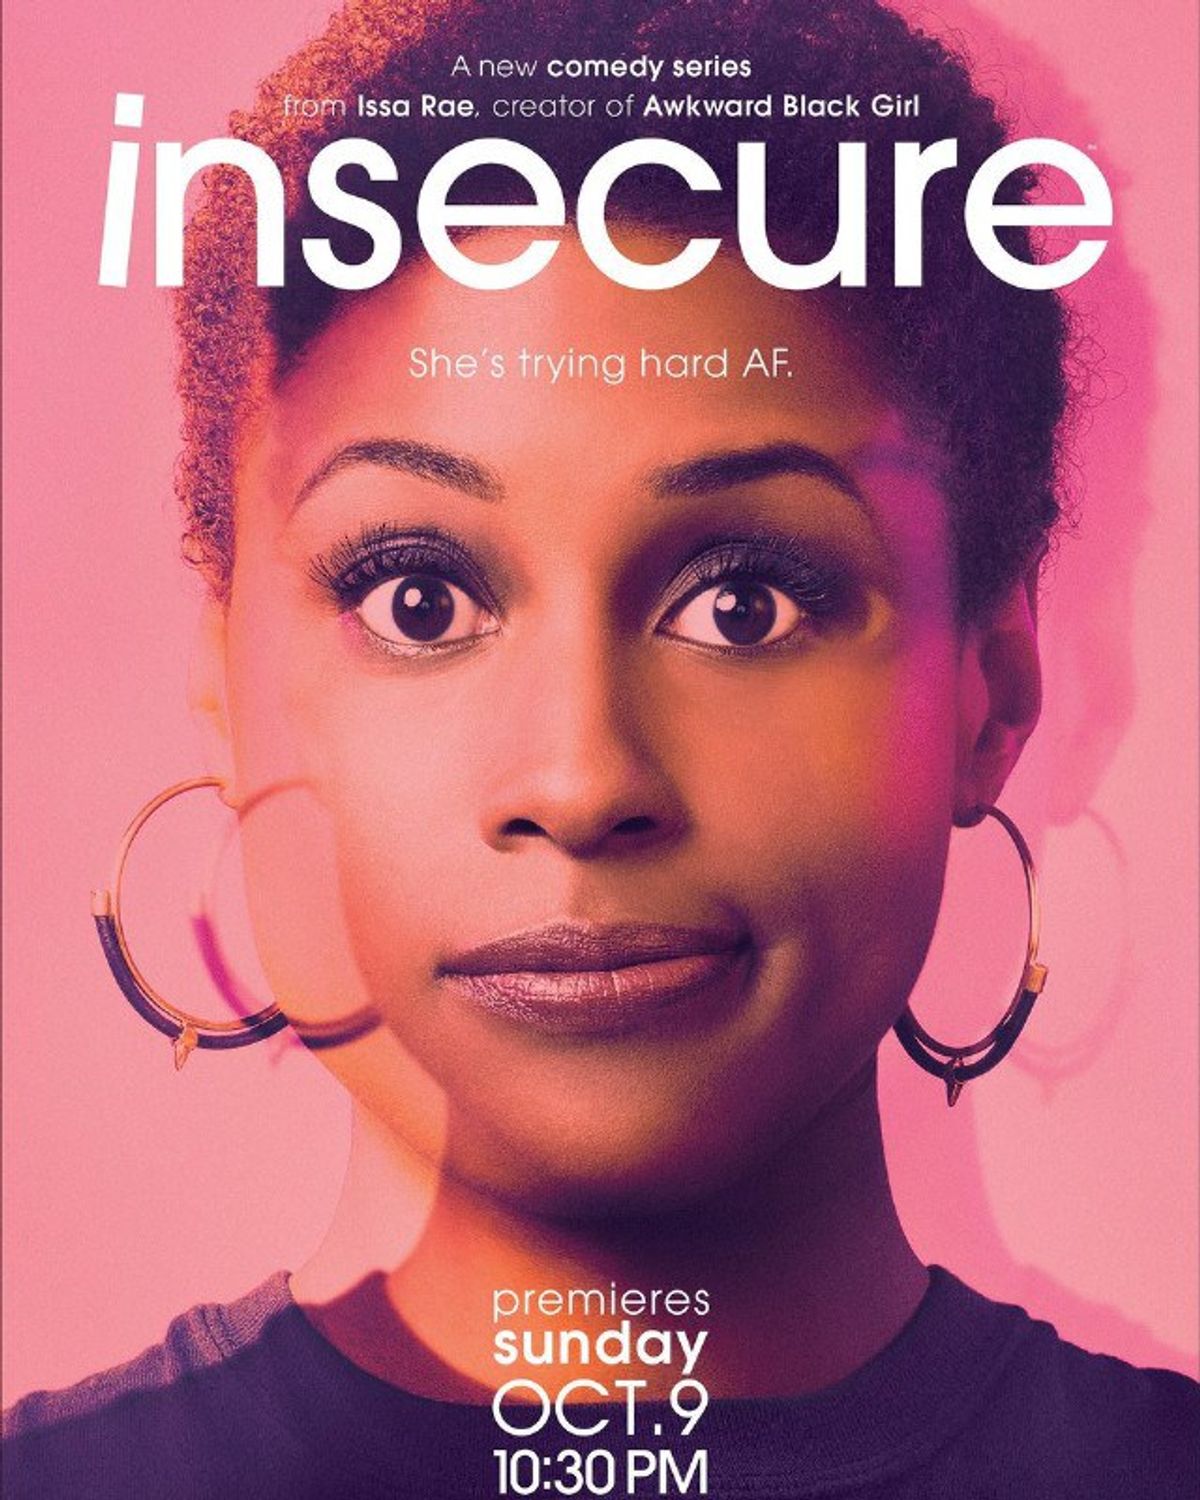 Spelman's Q&A With Issa Rae From HBO's 'Insecure'